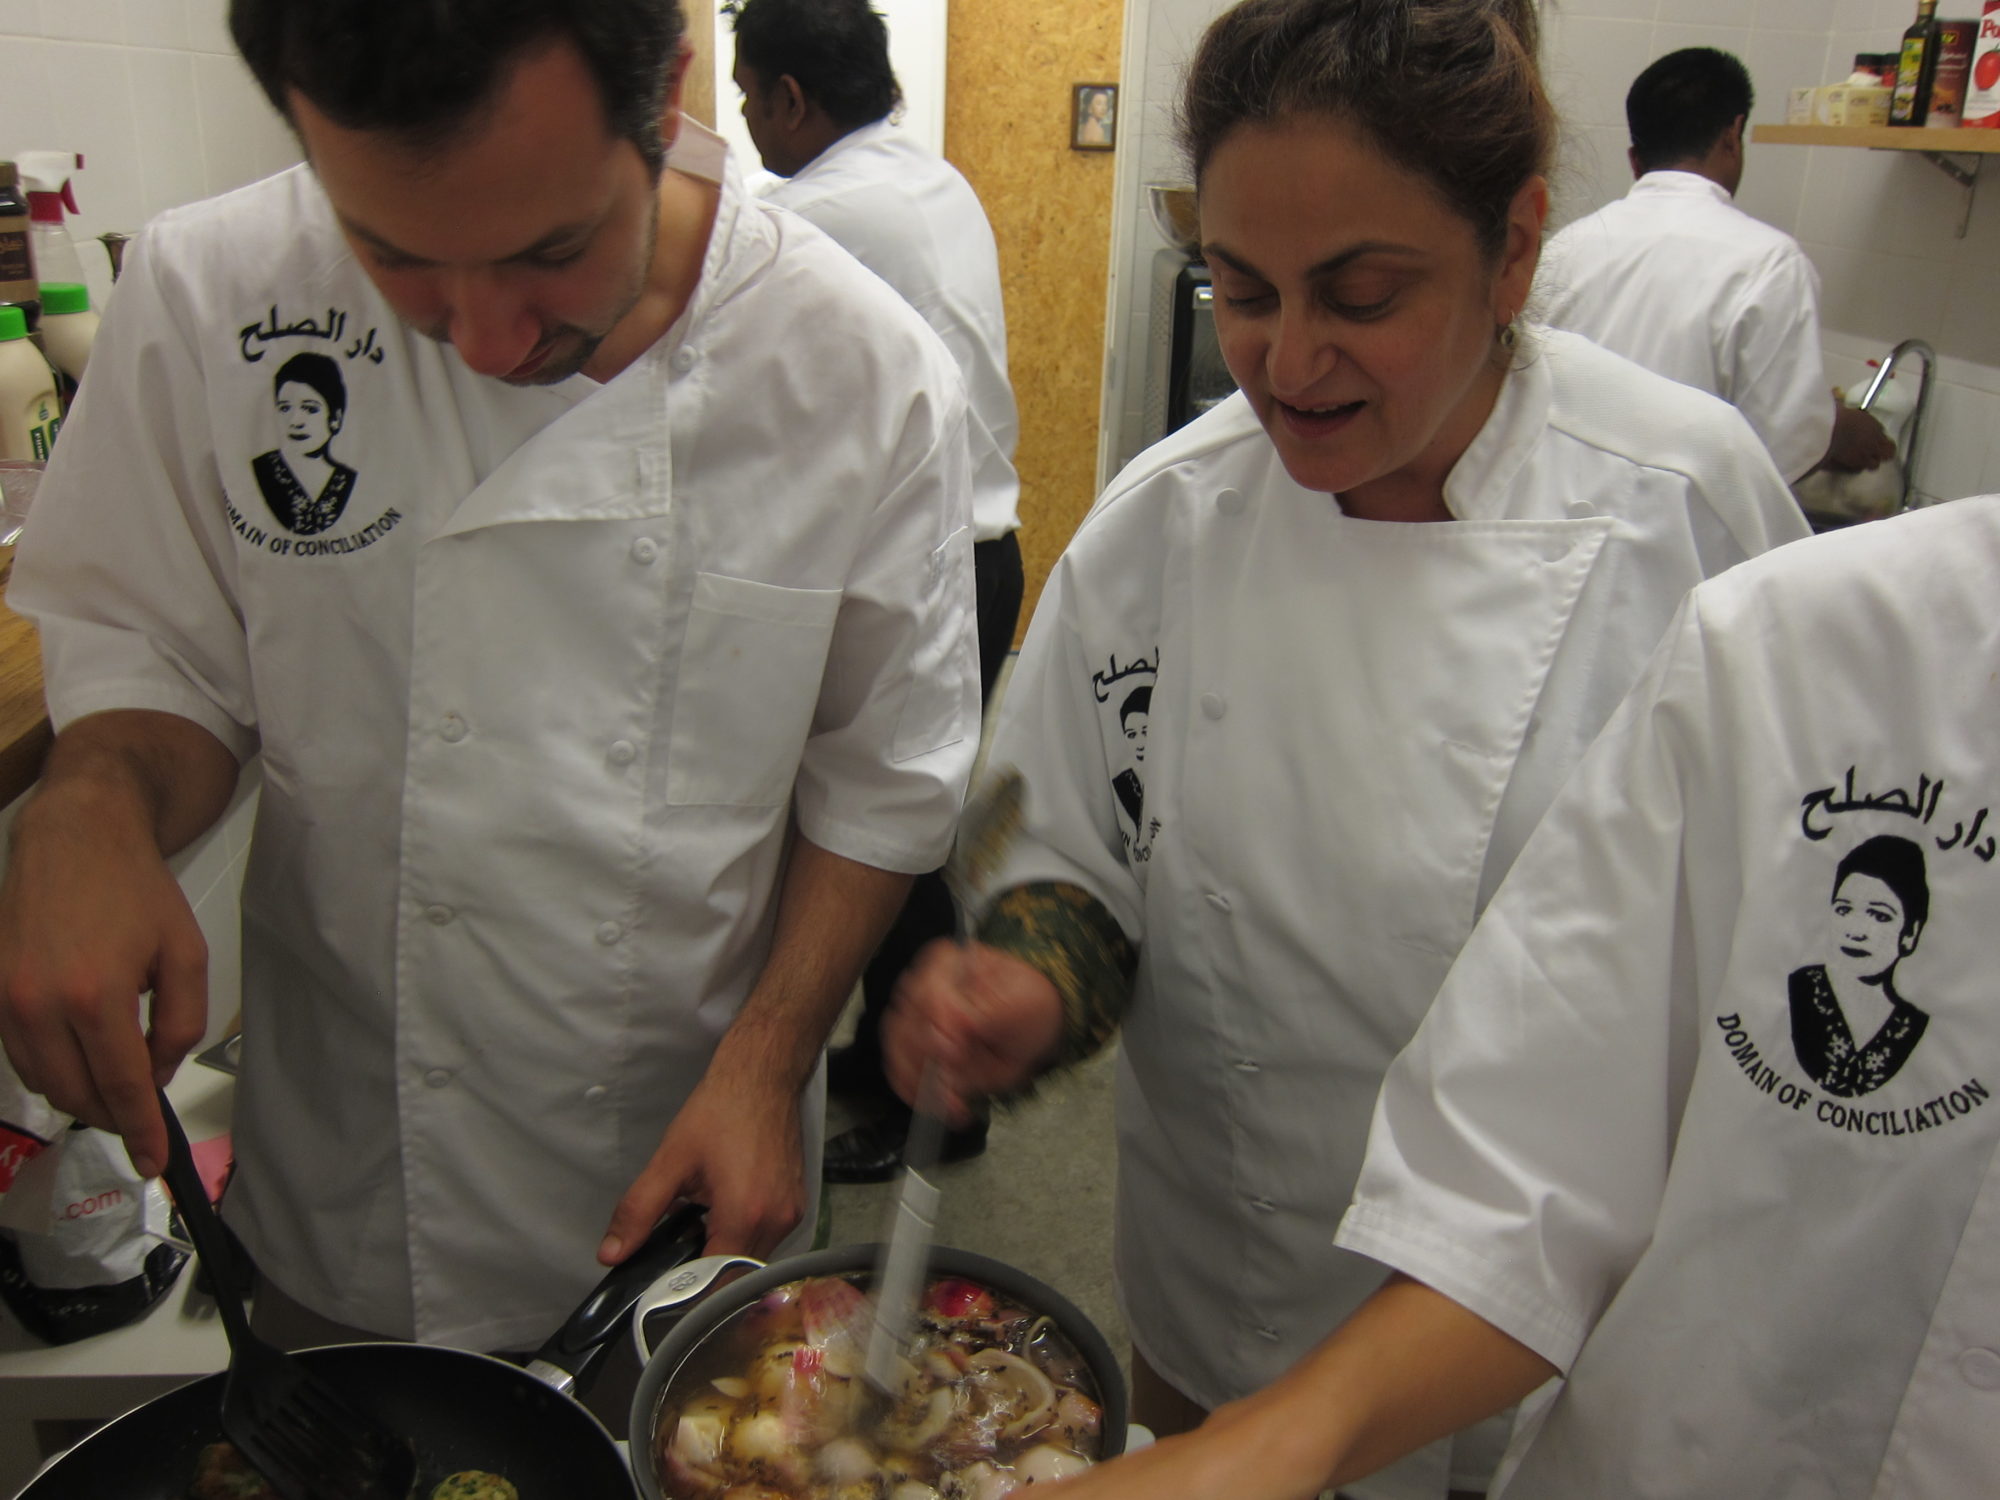 An image of two chefs stirring food.